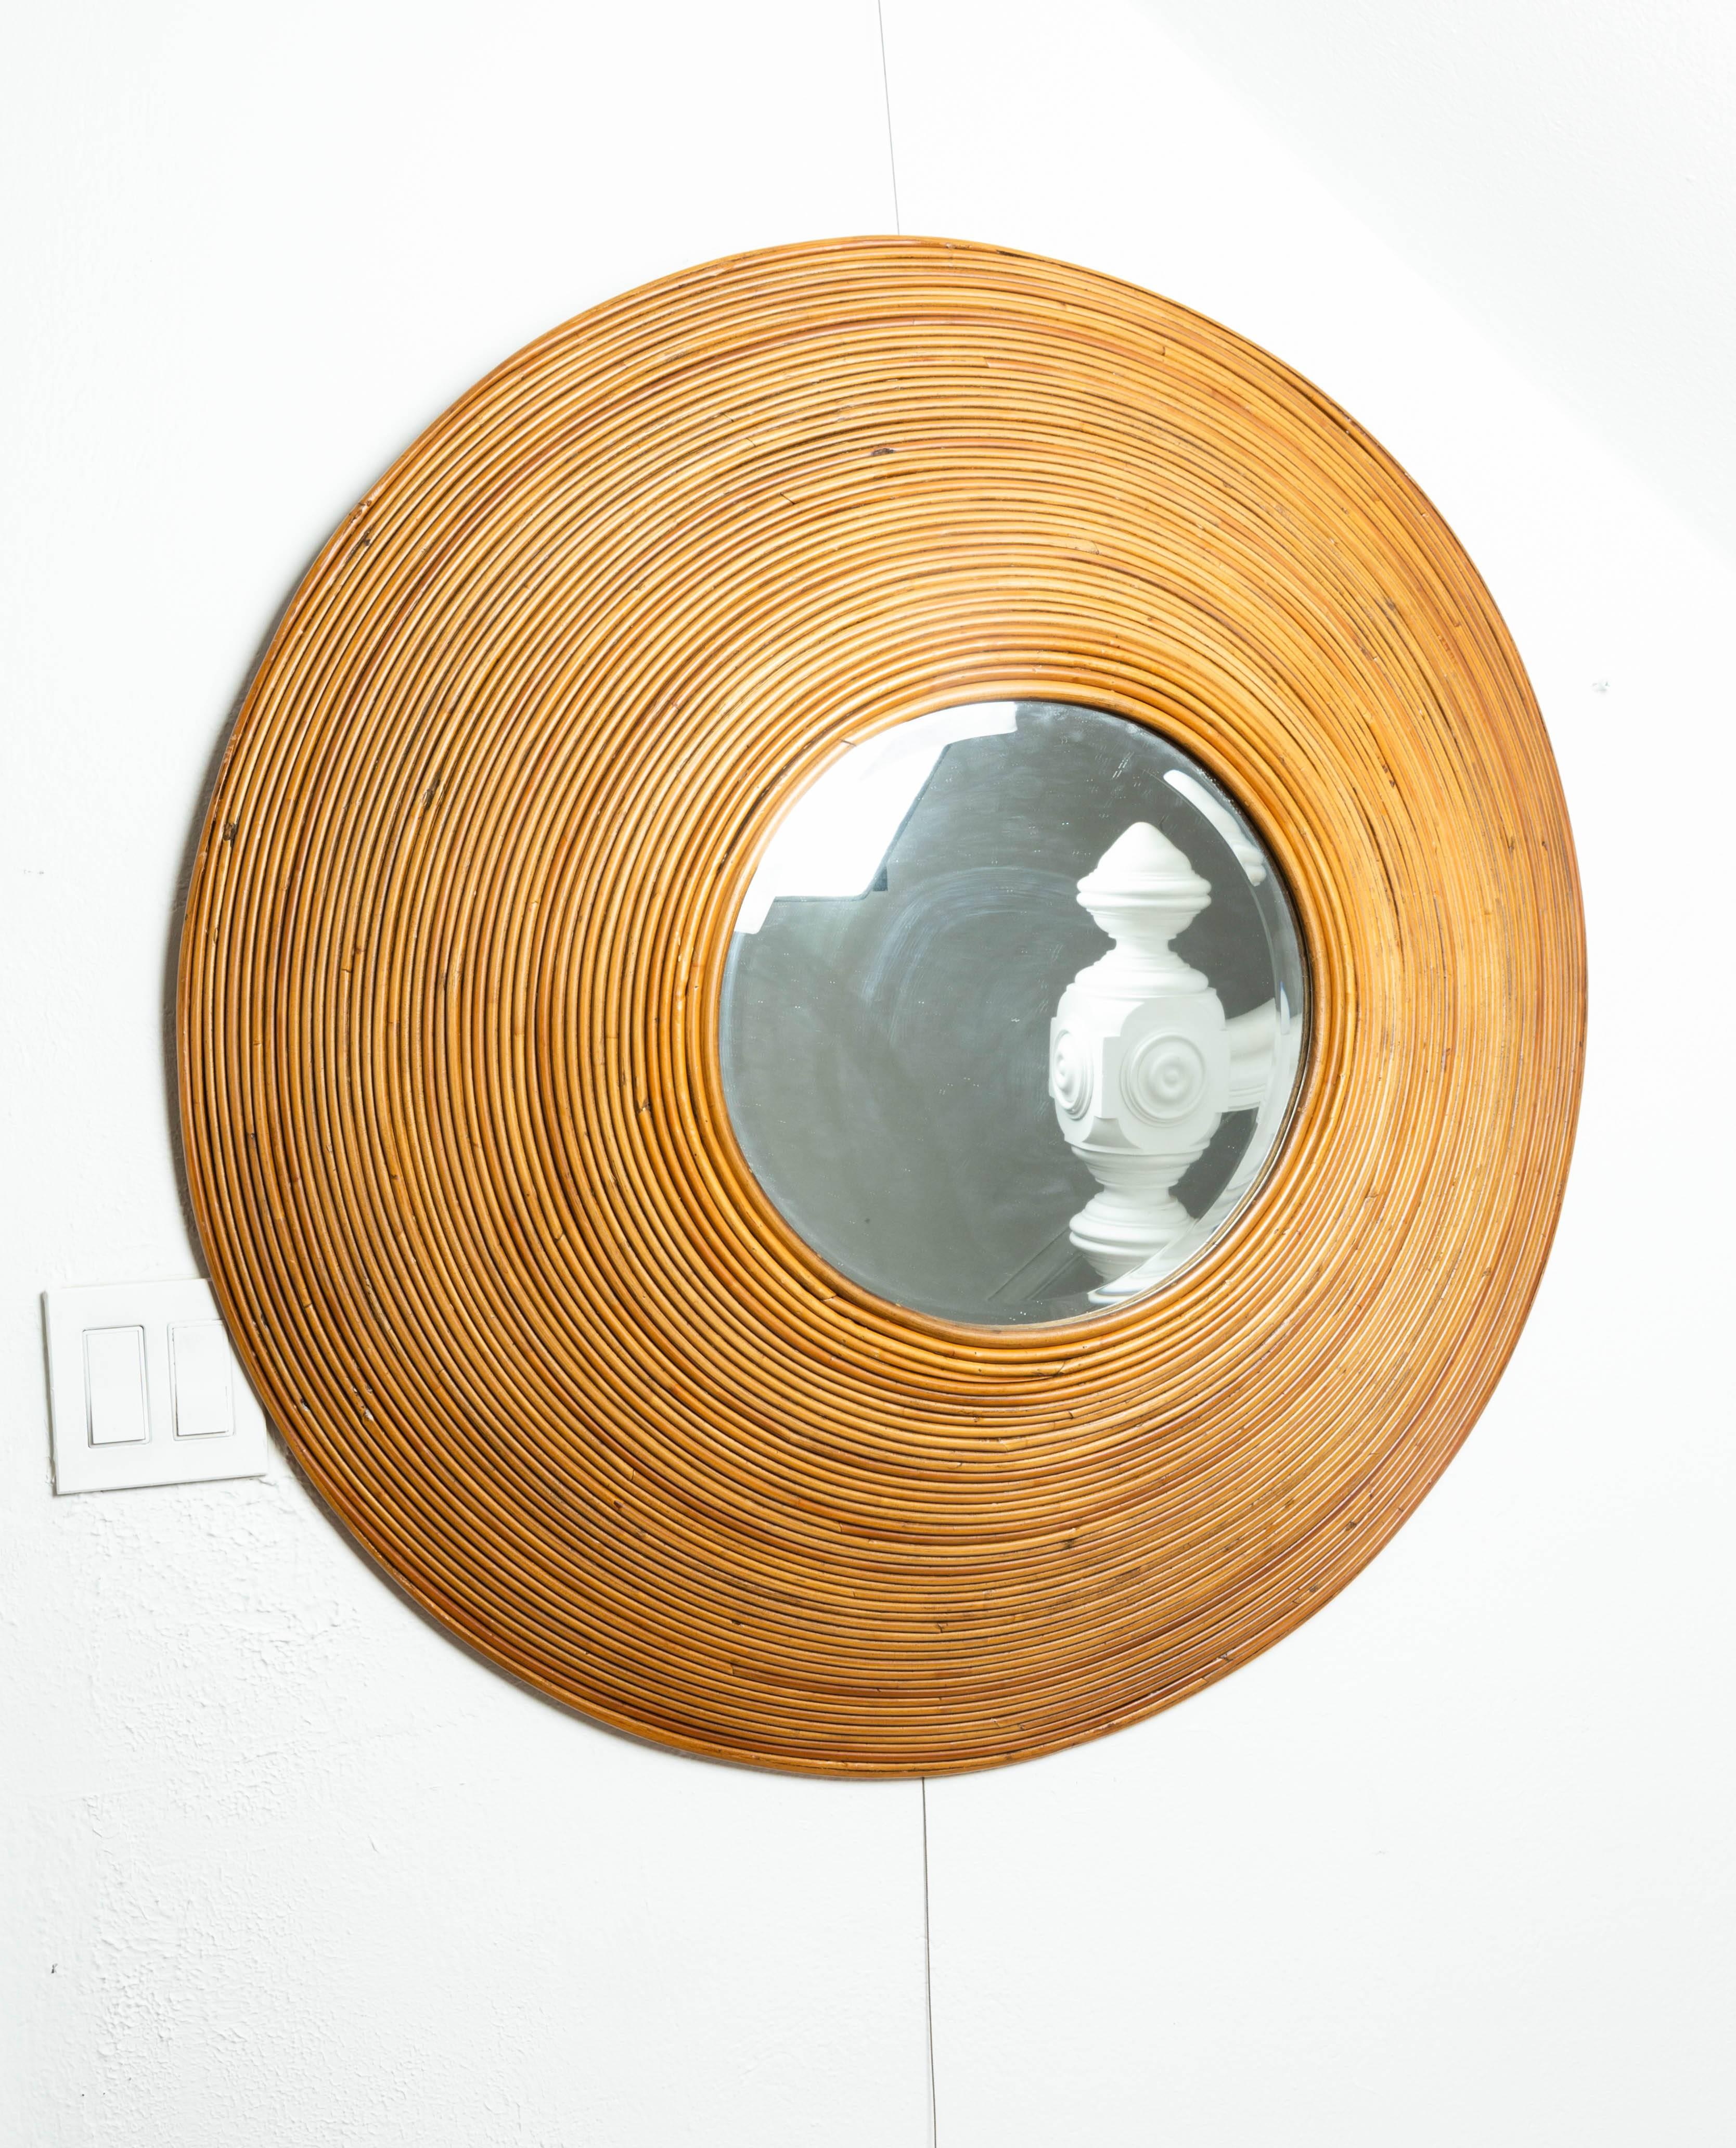 20th Century Large Circular Beveled Mirror with Bamboo Reed Surround